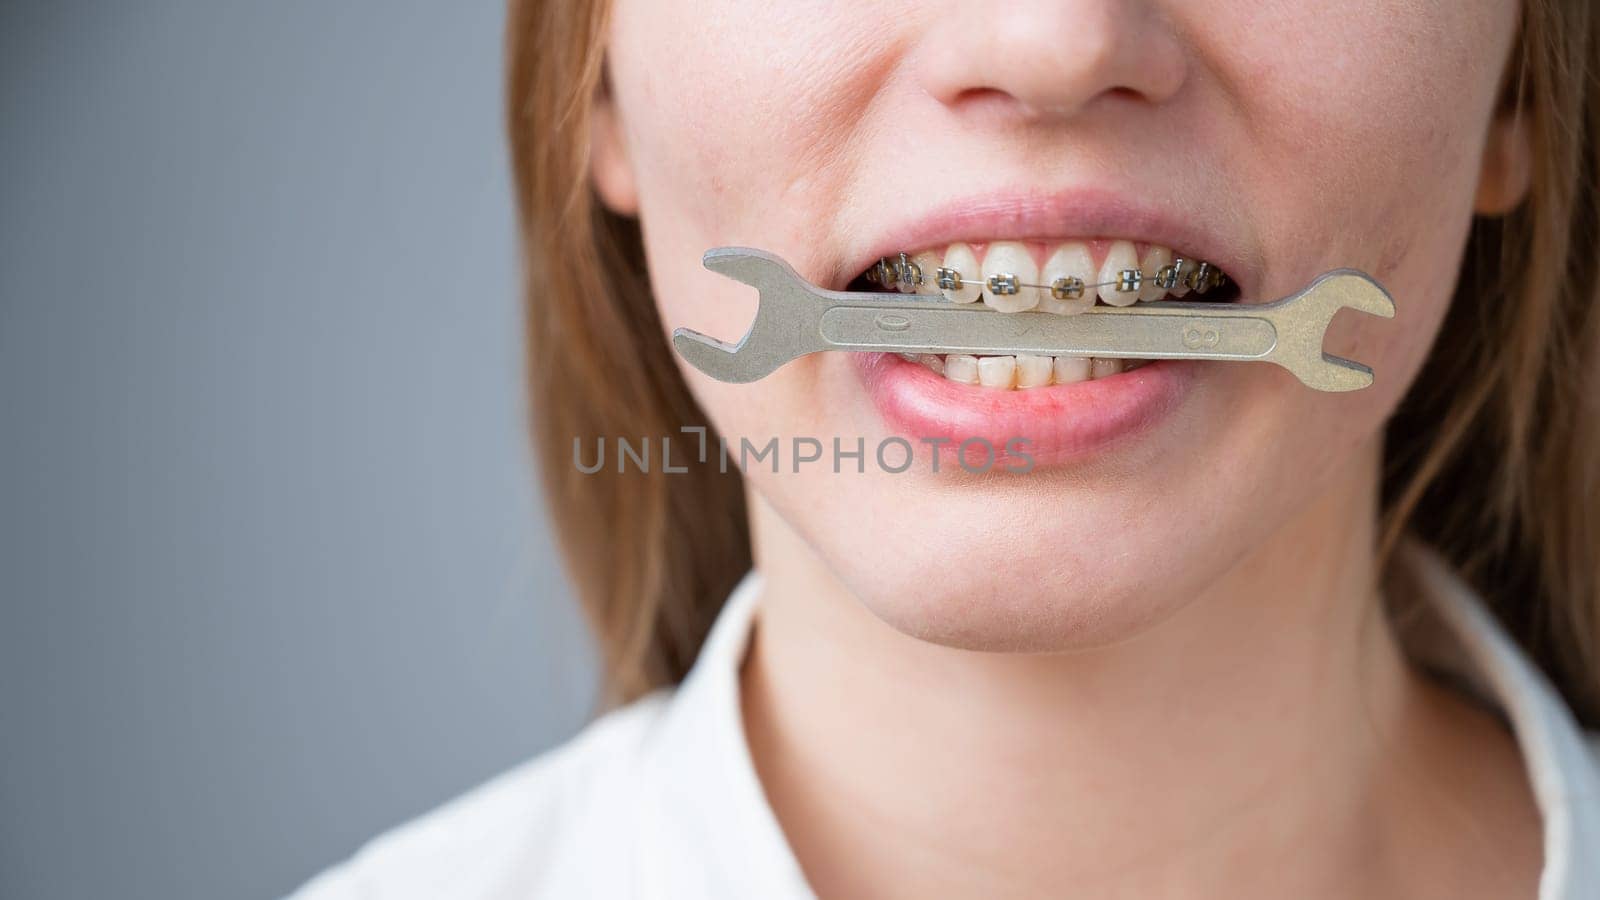 Close-up portrait of a woman with braces holding a wrench in her teeth